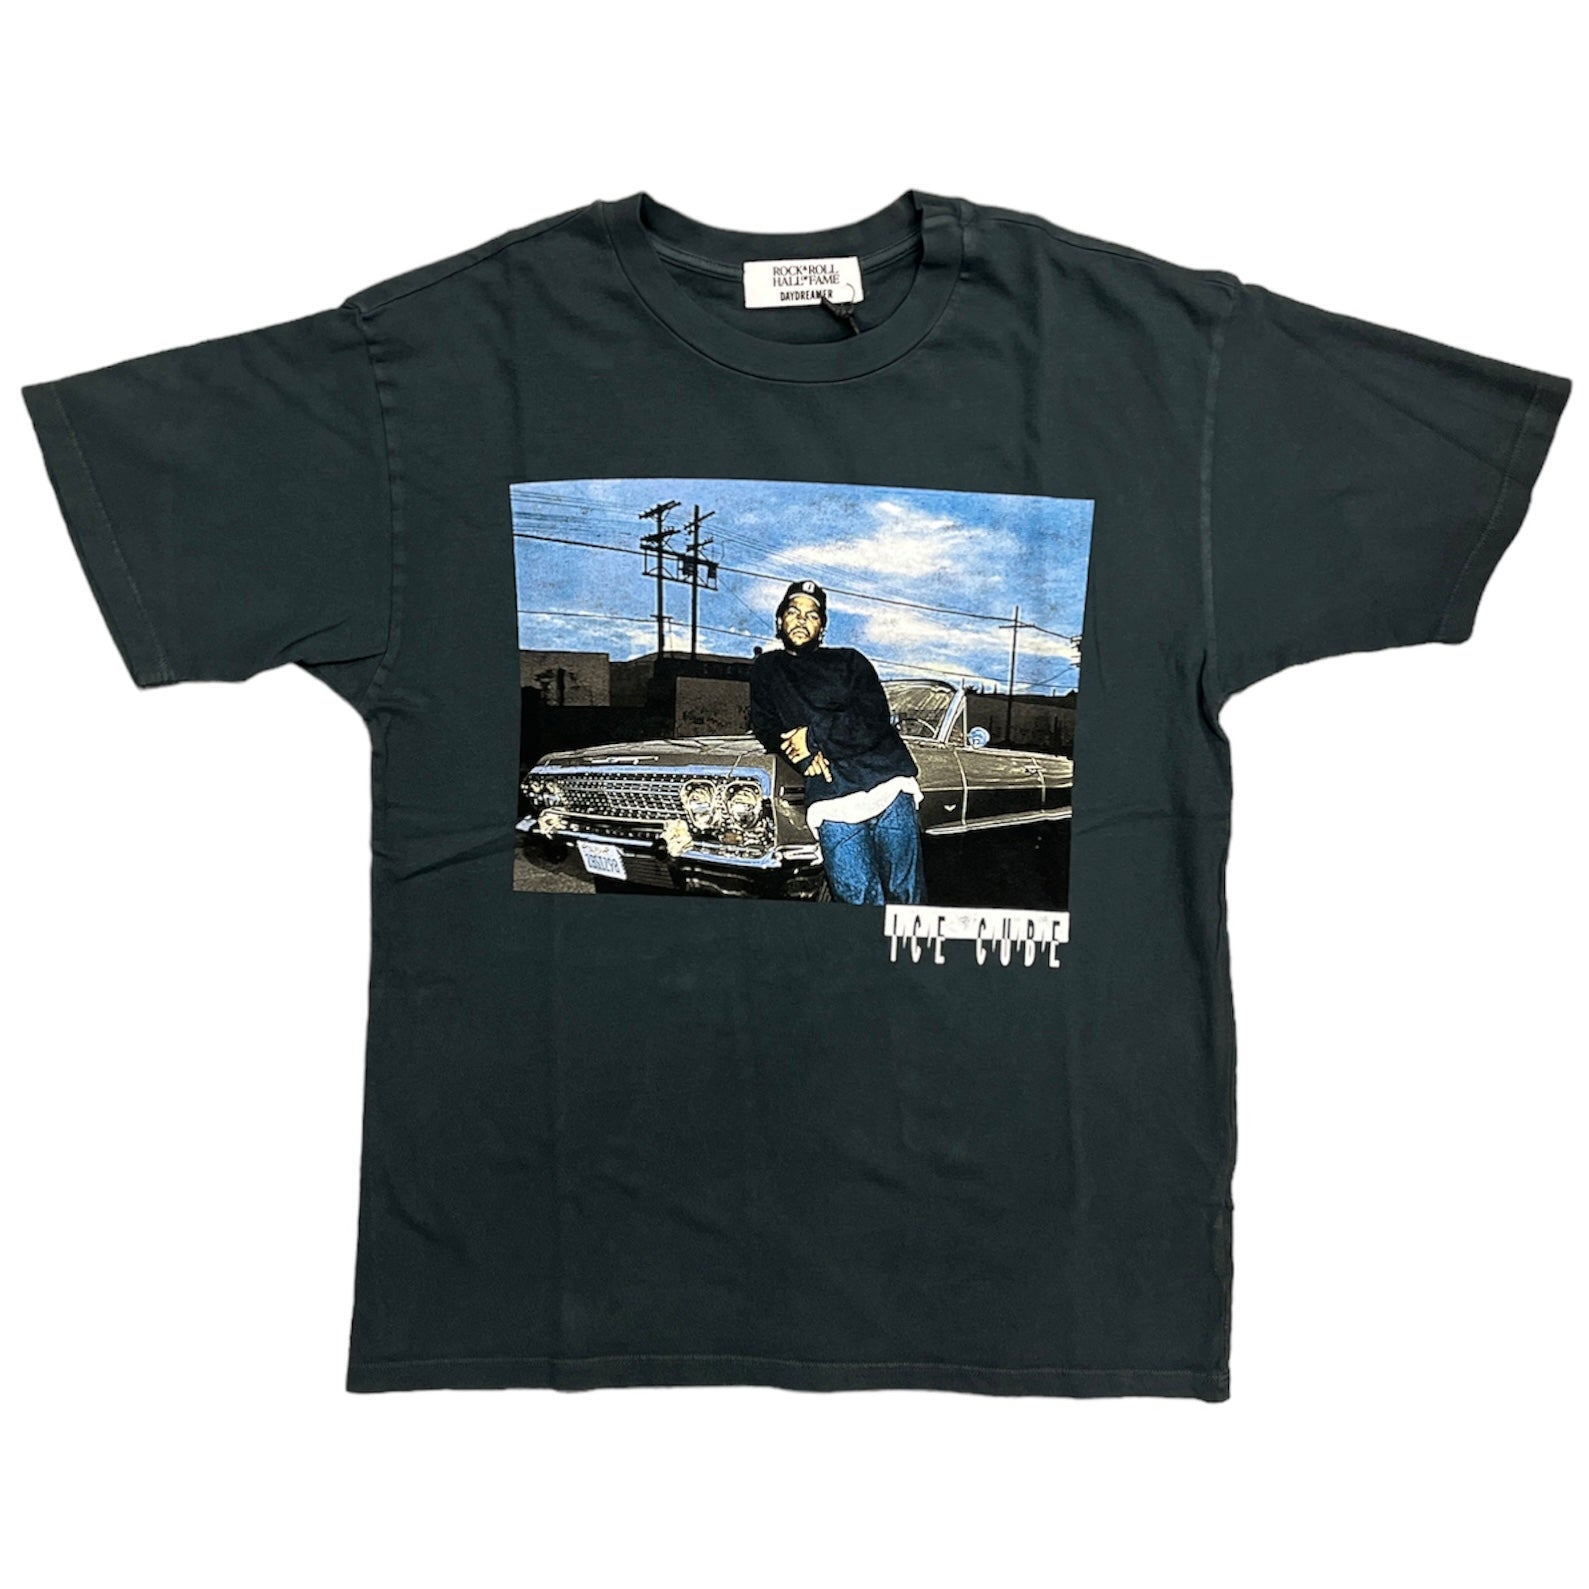 ICE CUBE - ROCK HALL EXCLUSIVE LOW RIDER UNISEX T-SHIRT – Rock Hall Shop